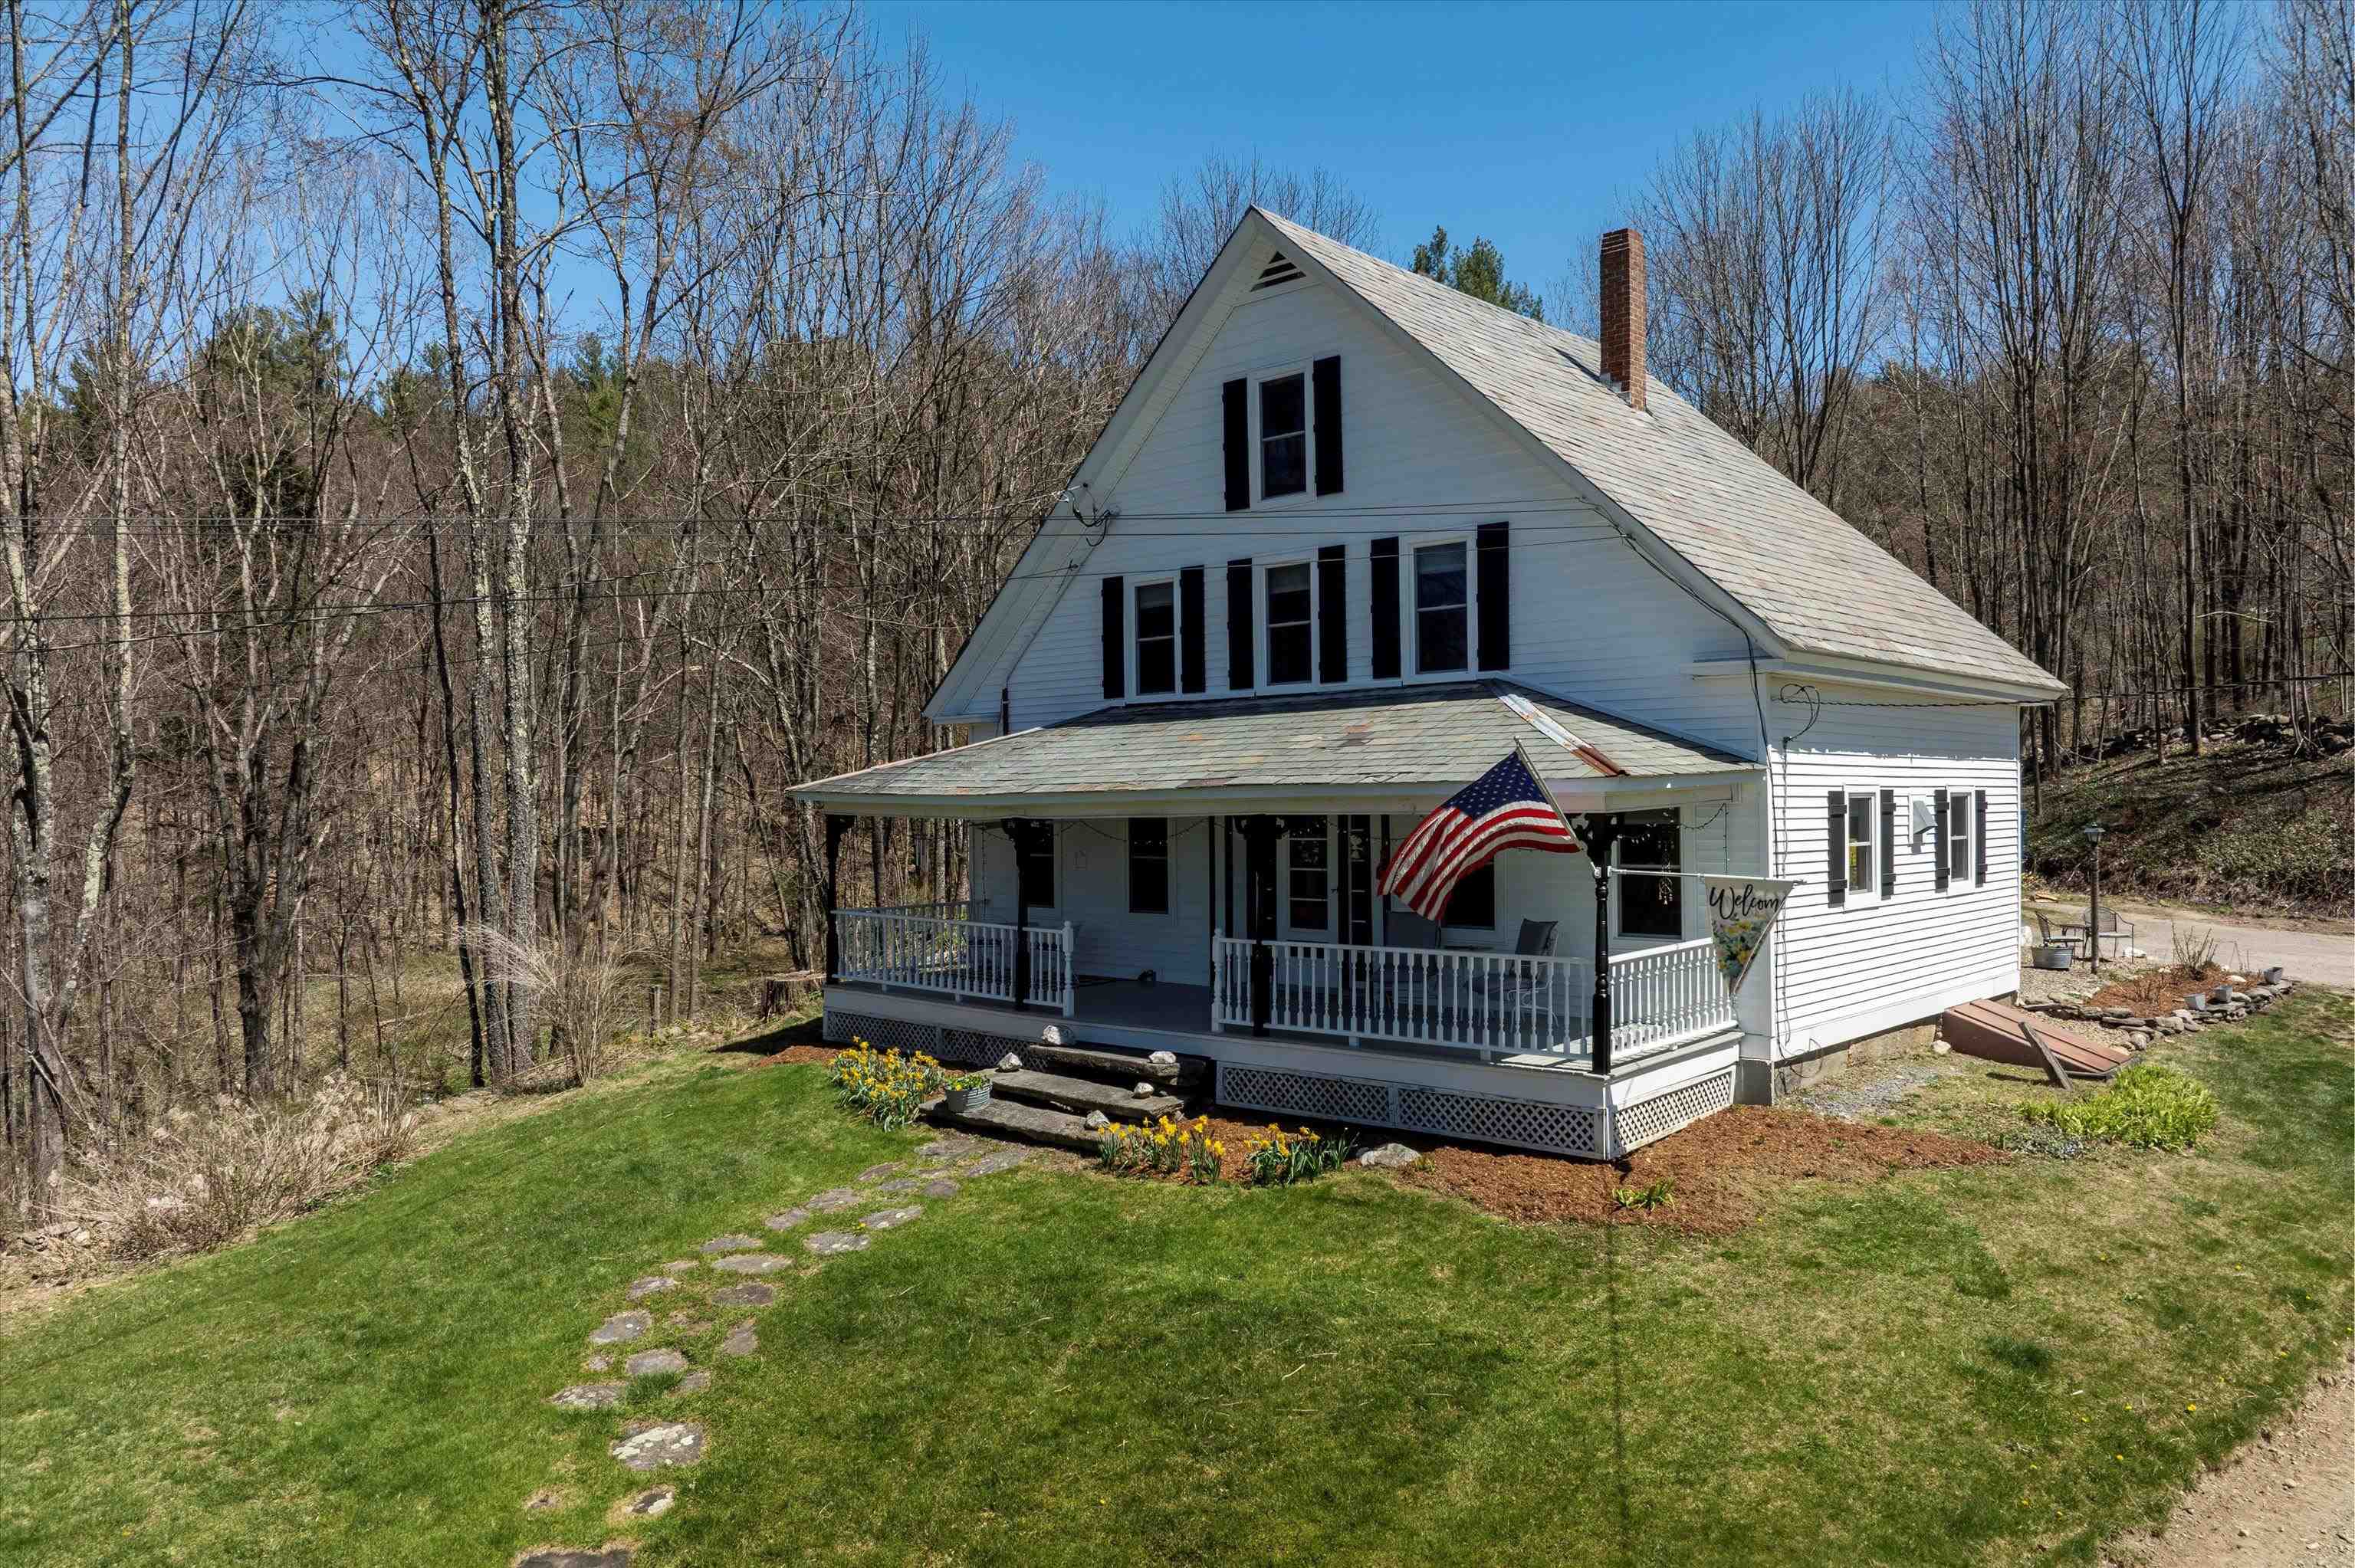 TOWNSHEND VT Homes for sale